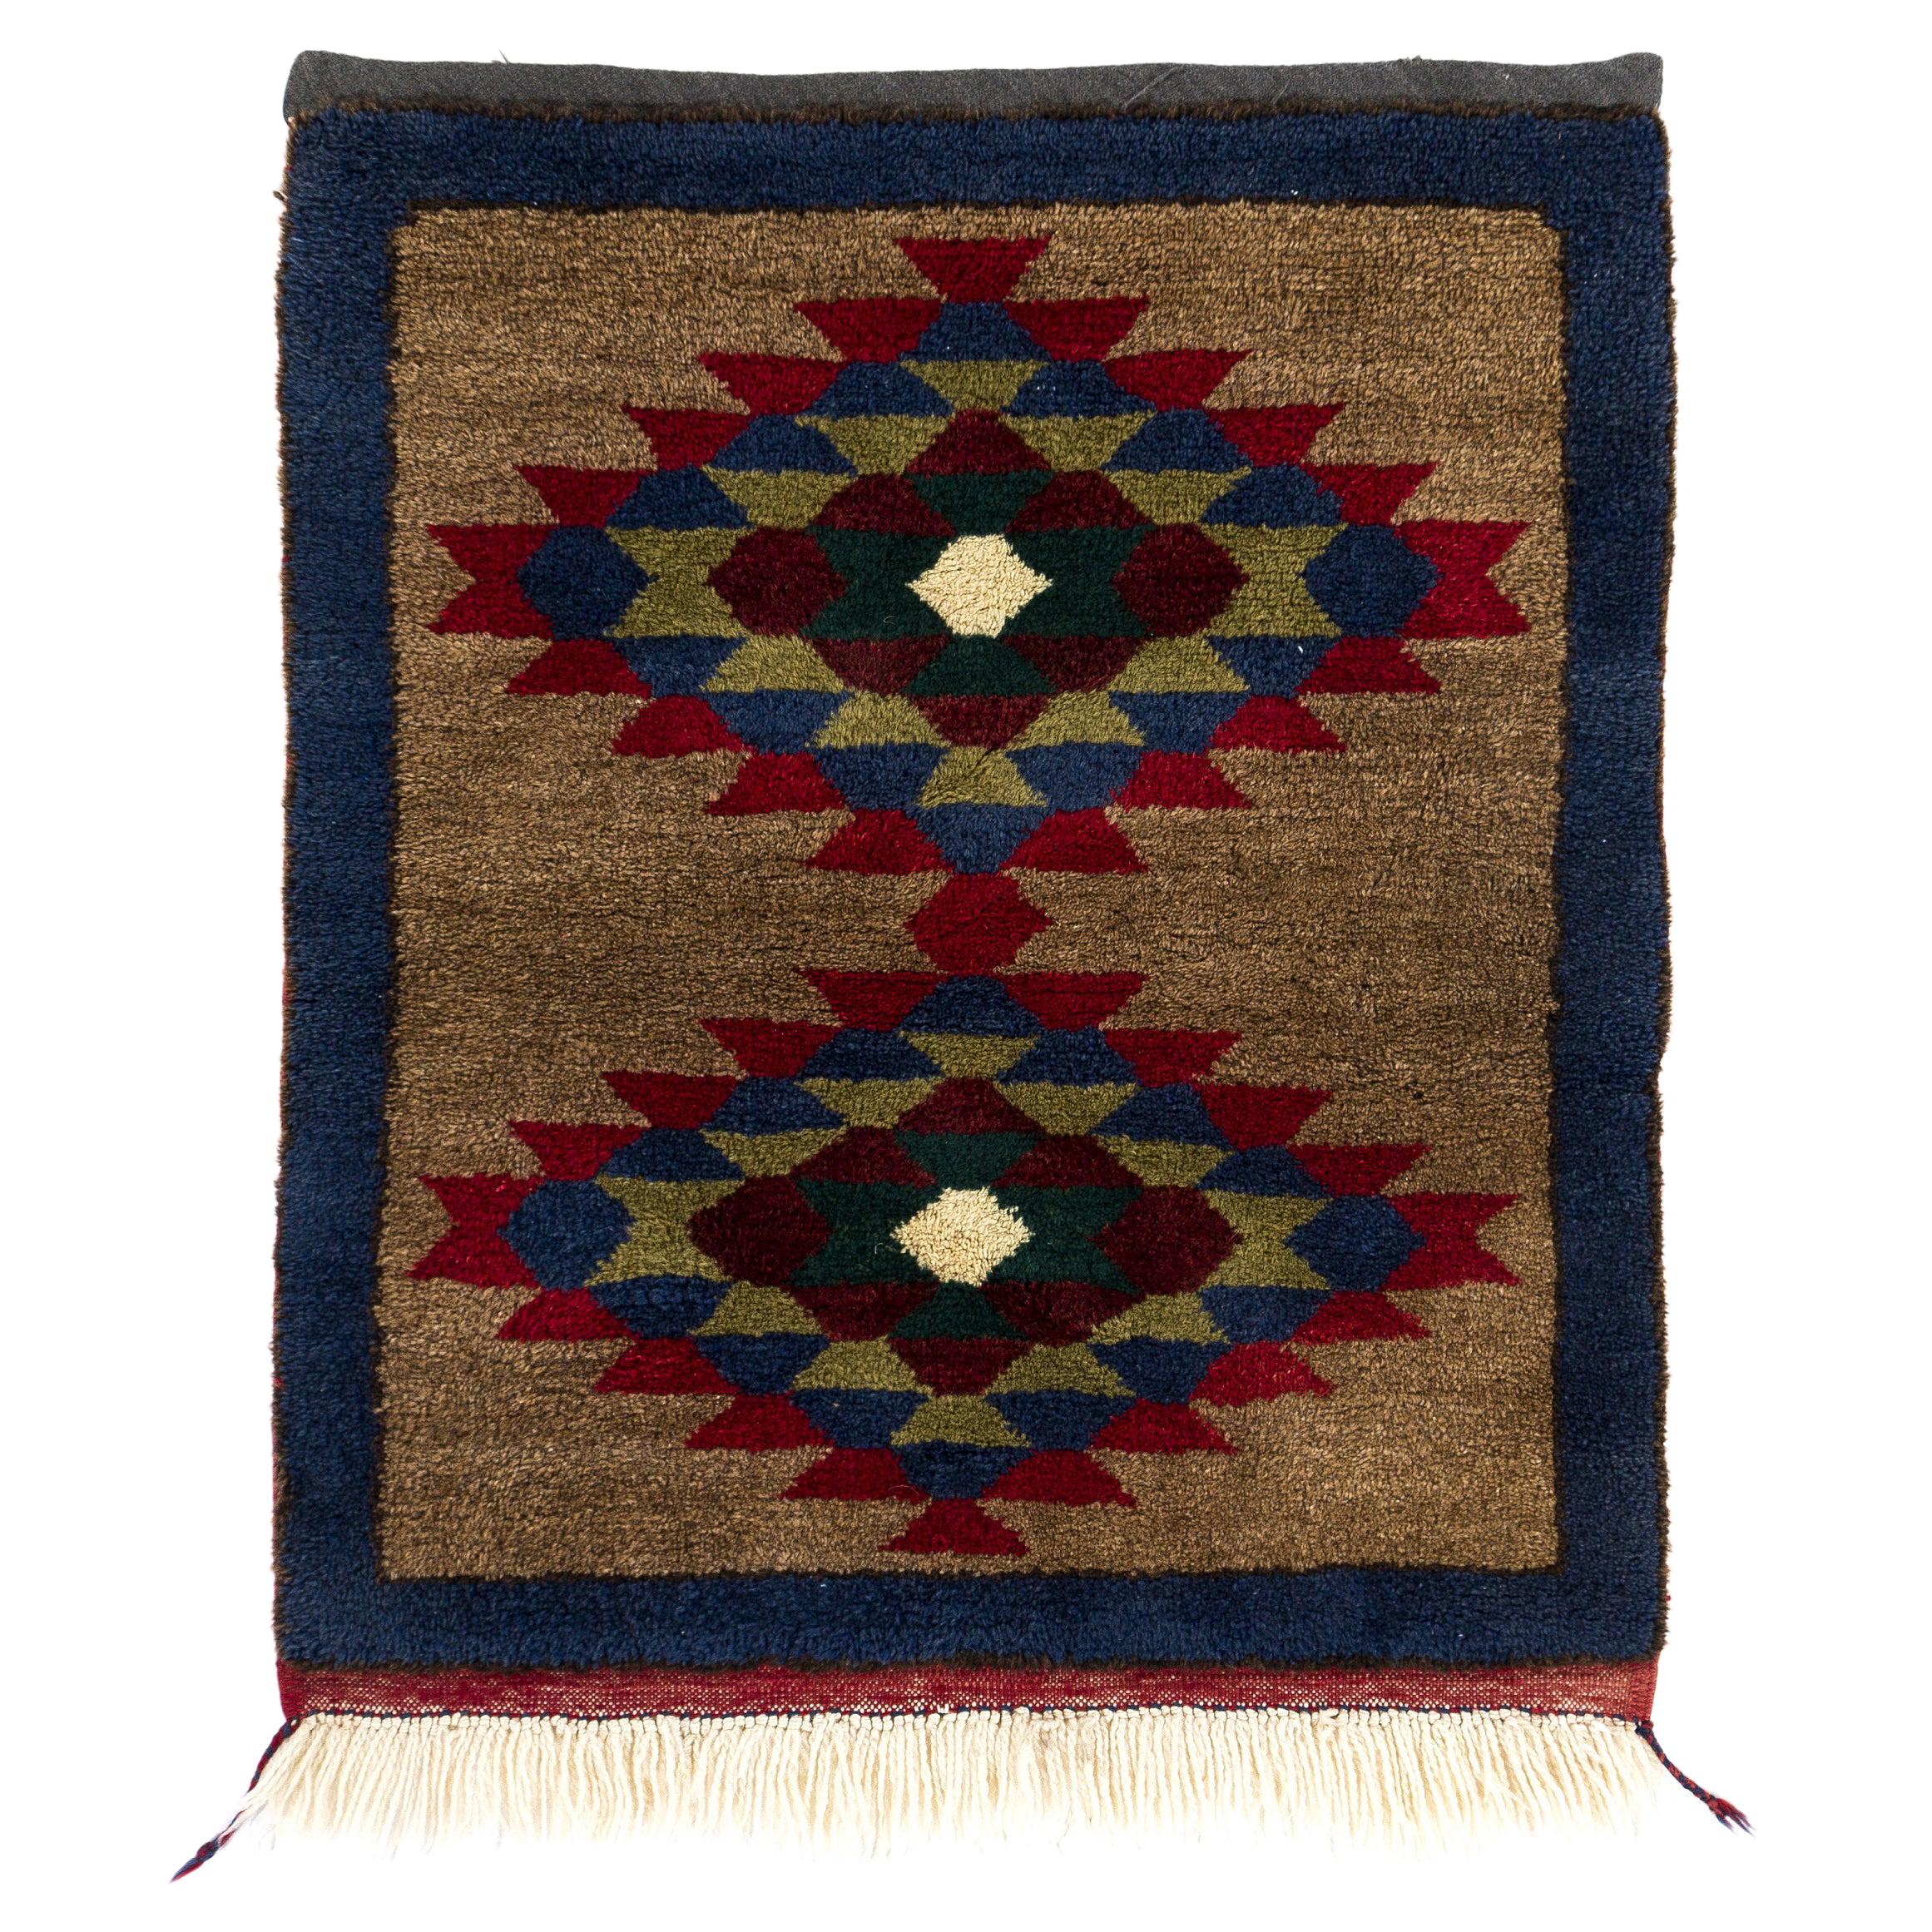 3x3.6 Ft Vintage Hand-Knotted "Tulu" Accent Rug with Geometric Design, All Wool